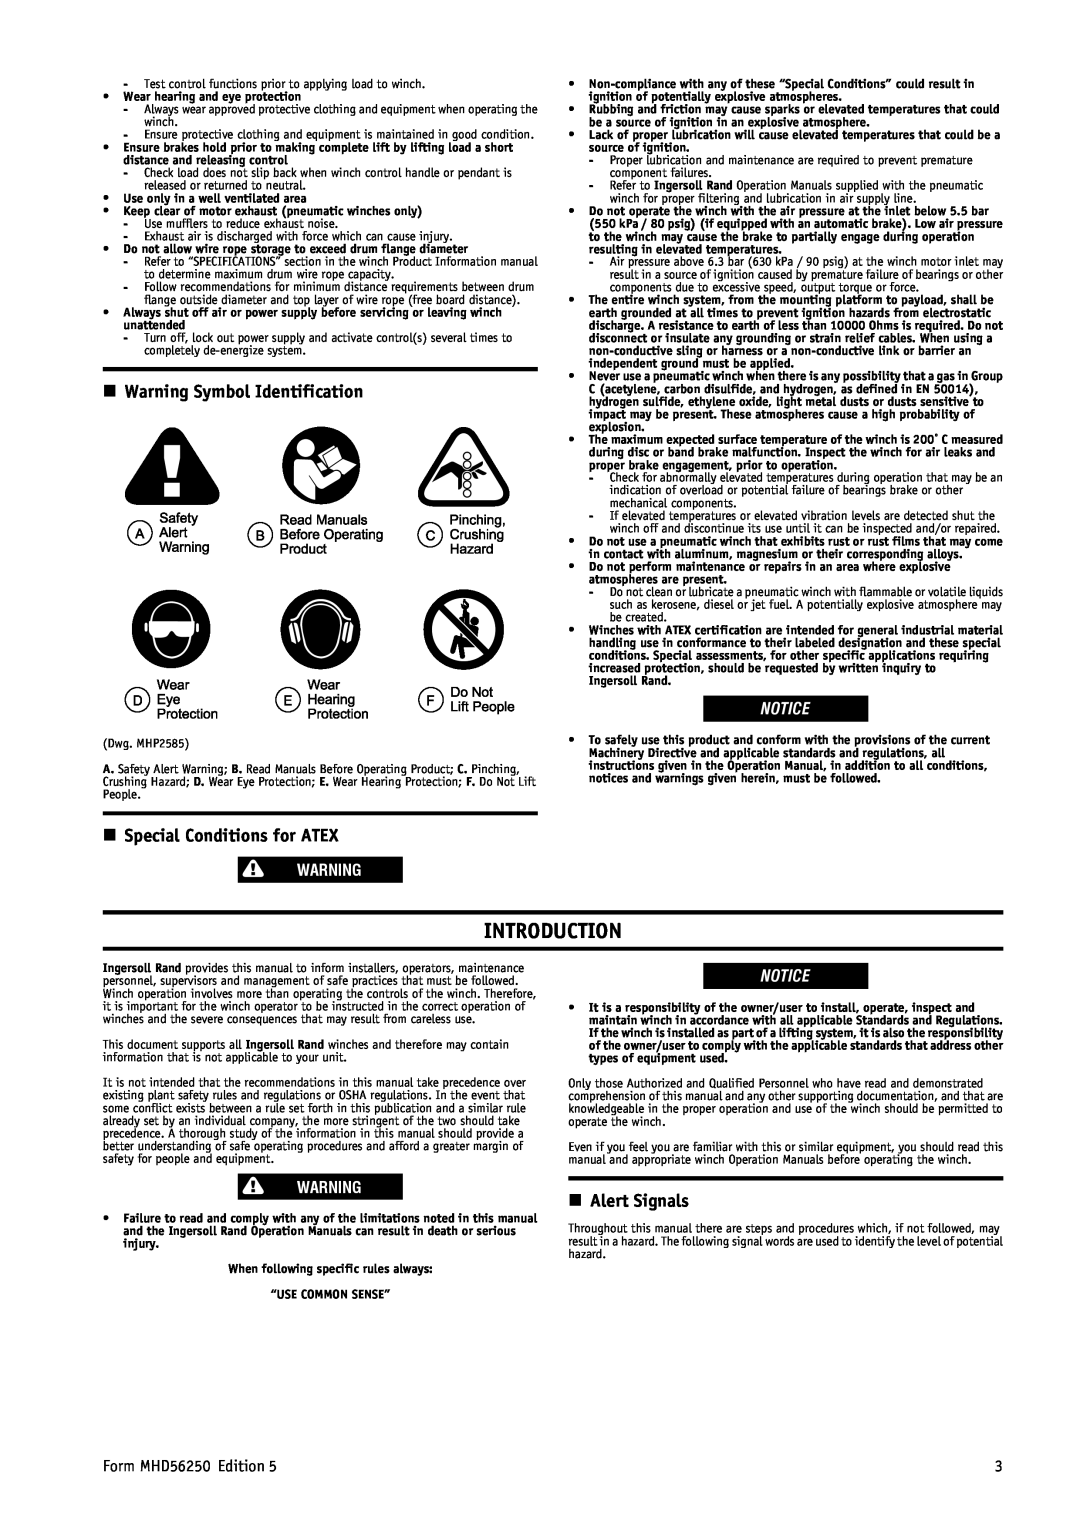 Ingersoll-Rand MHD56250 Introduction, n Warning Symbol Identification, n Special Conditions for ATEX, n Alert Signals 